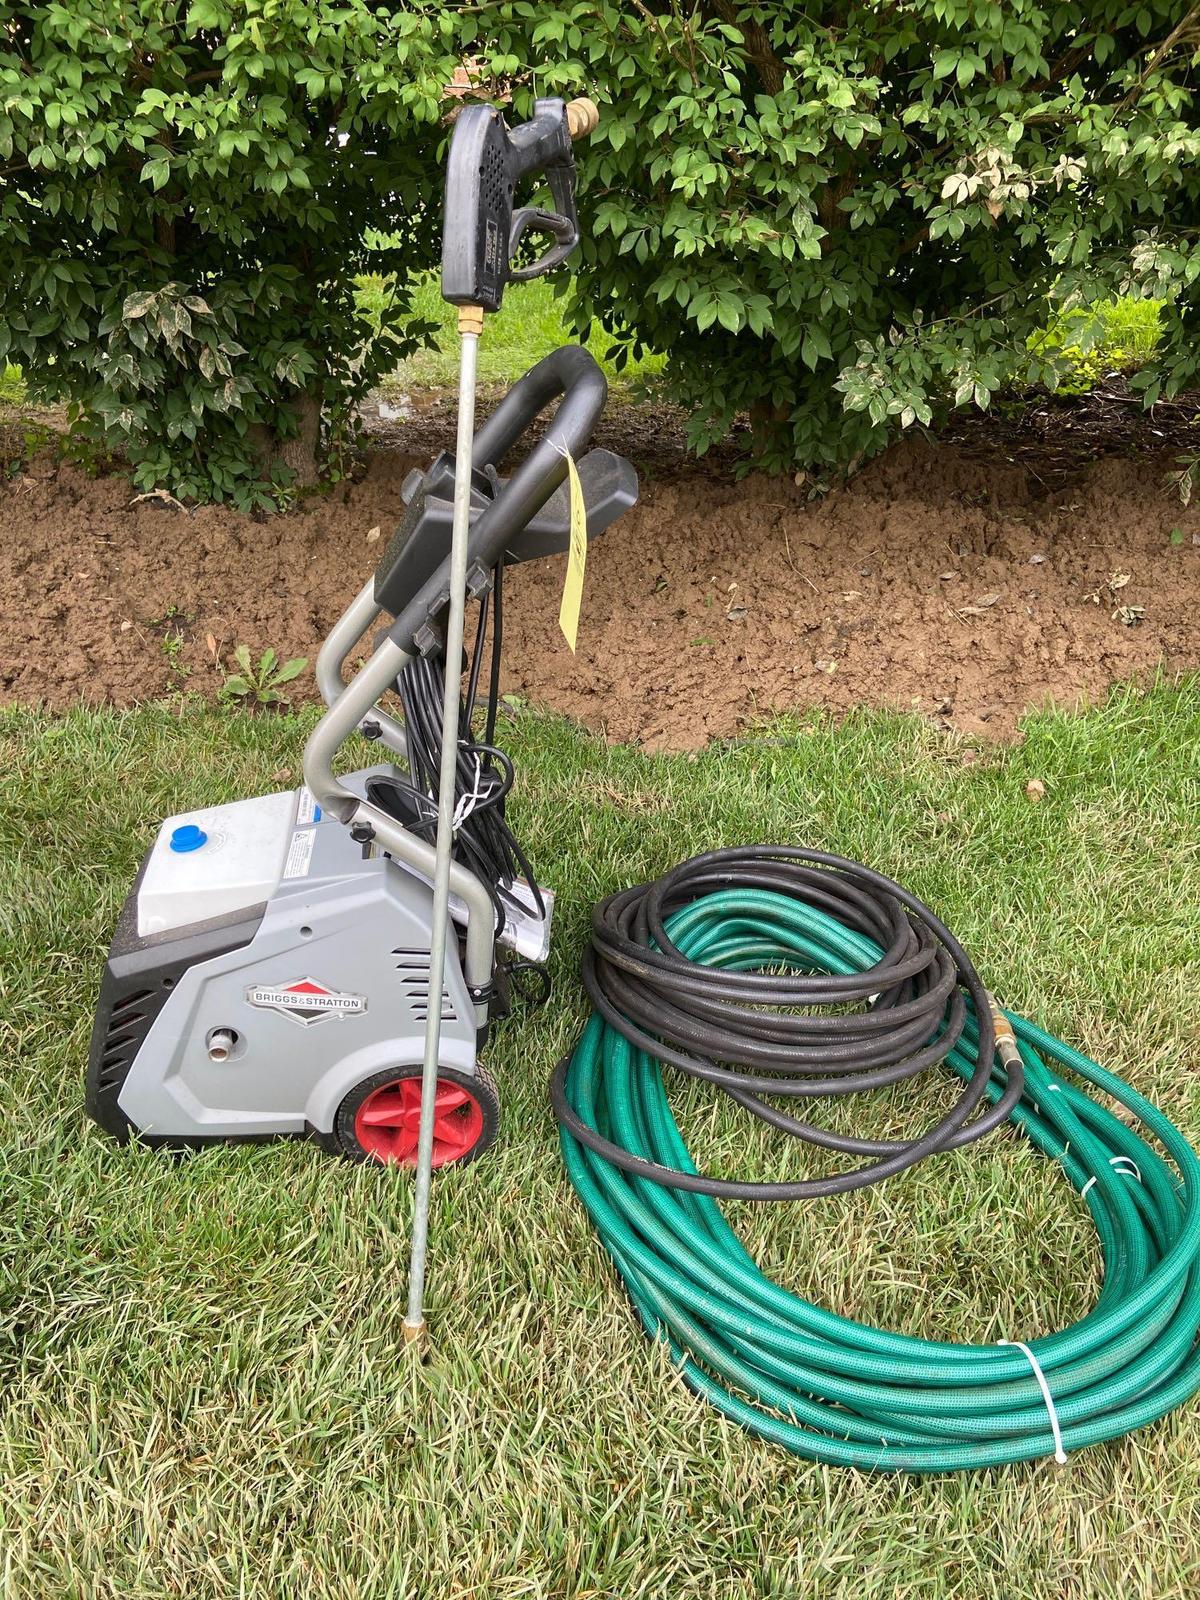 Briggs and Stratton Power Washer